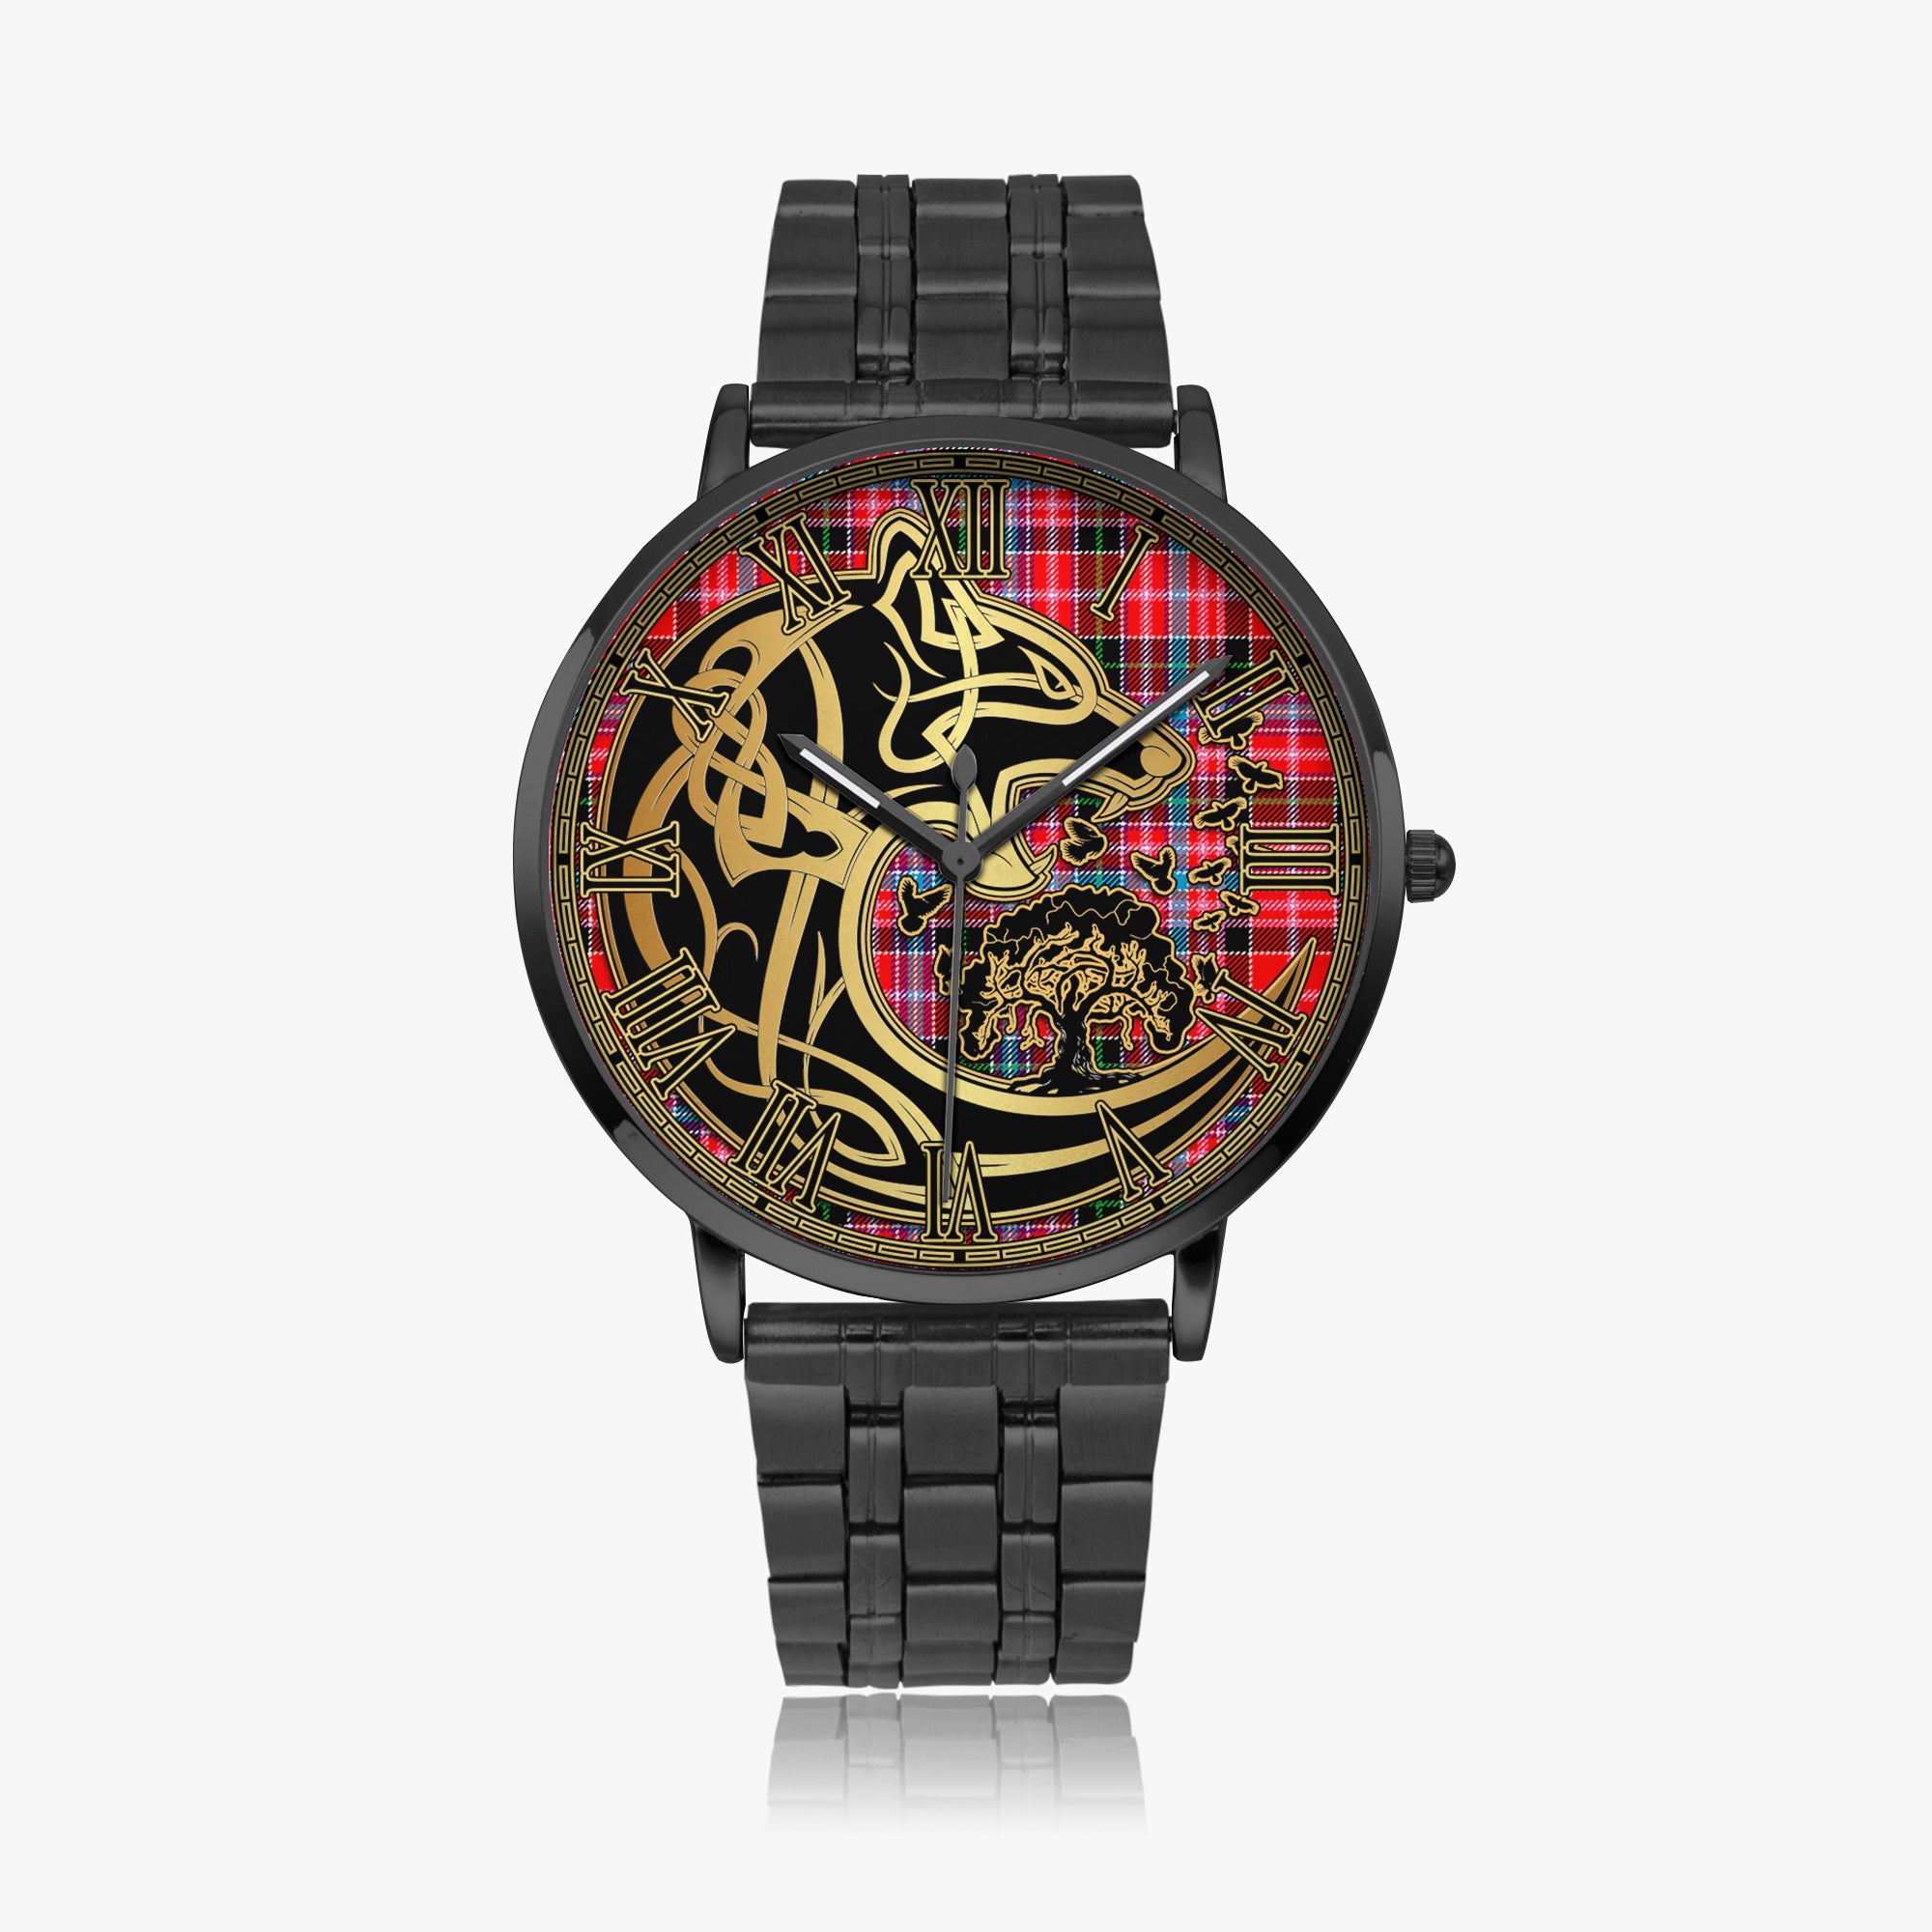 udny-tartan-watch-with-stainless-steel-trap-tartan-instafamous-quartz-stainless-steel-watch-golden-celtic-wolf-style